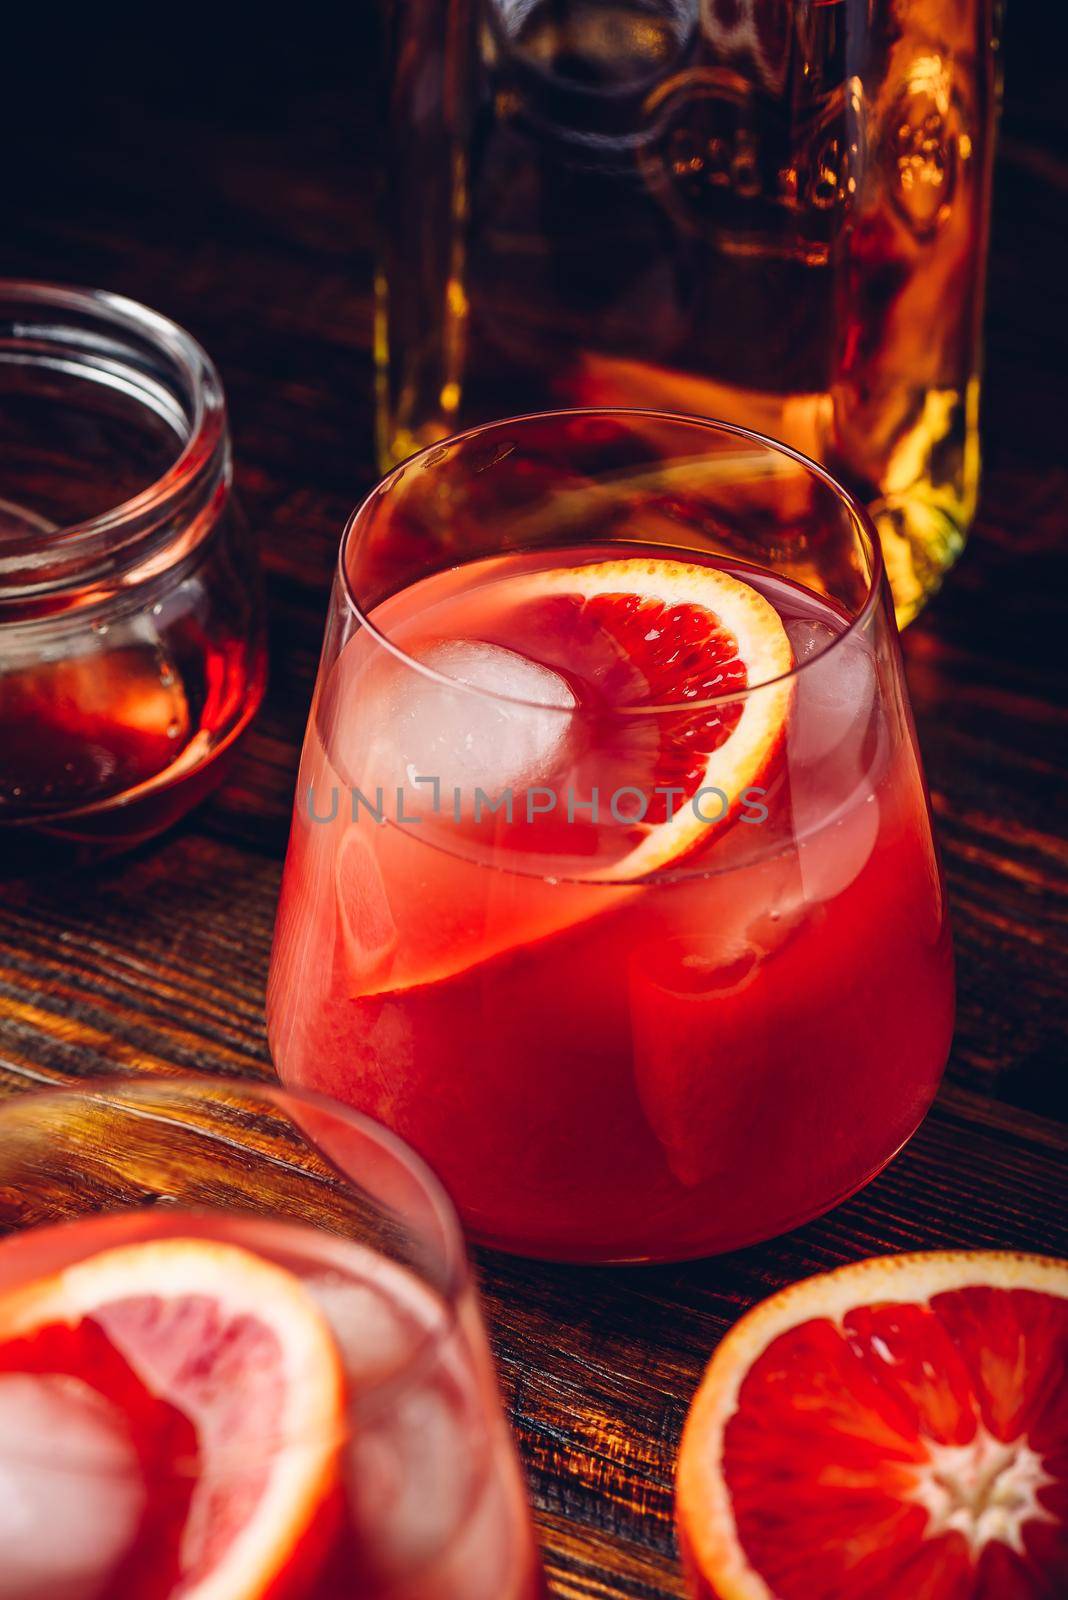 Whiskey sour cocktail with blood orange juice by Seva_blsv